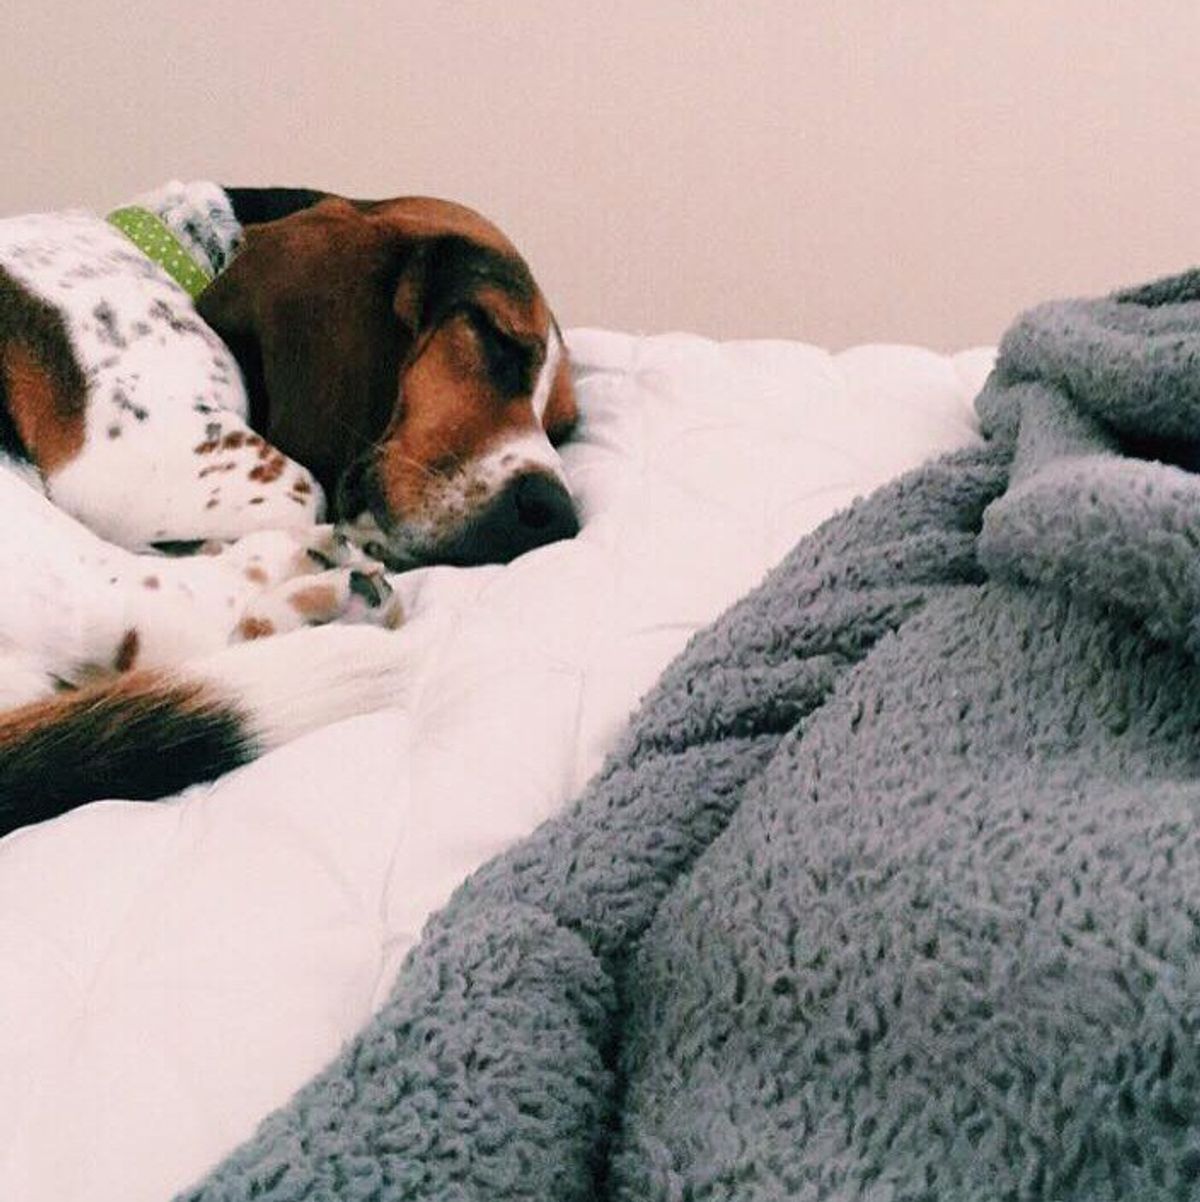 30 Things I Wish My Dog Could Actually Understand